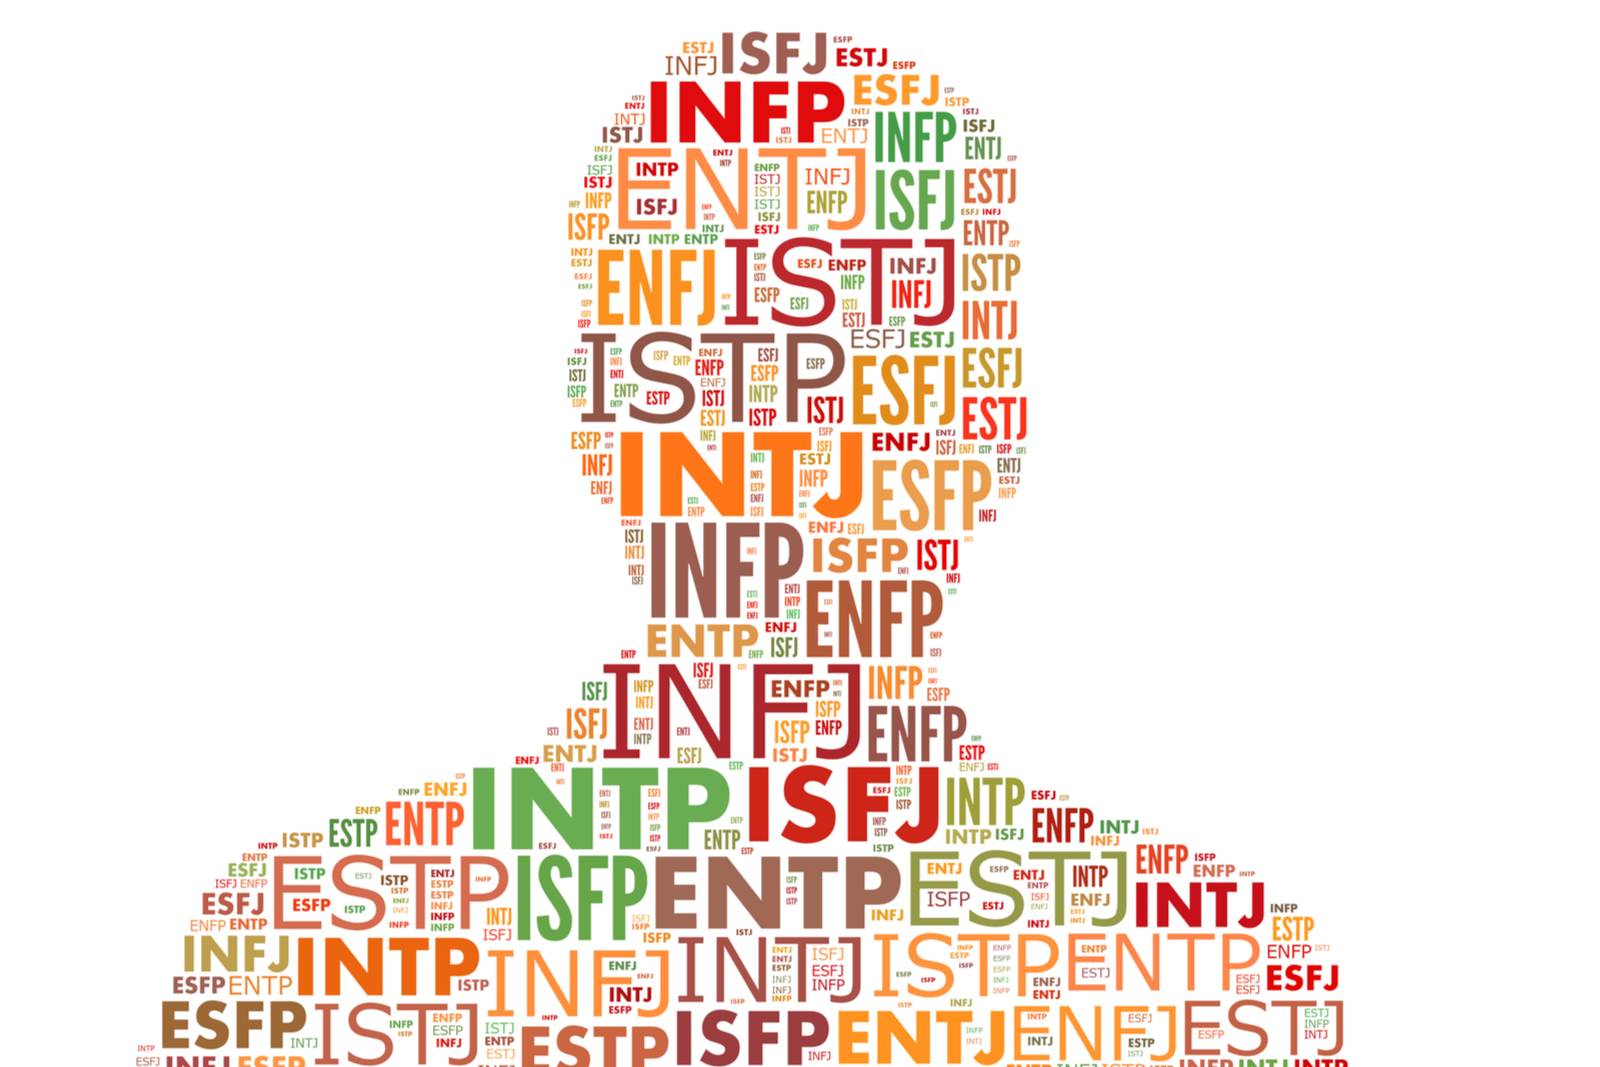 Myers-Briggs Type Indicator® (MBTI®)  Official Myers Briggs Personality  Test